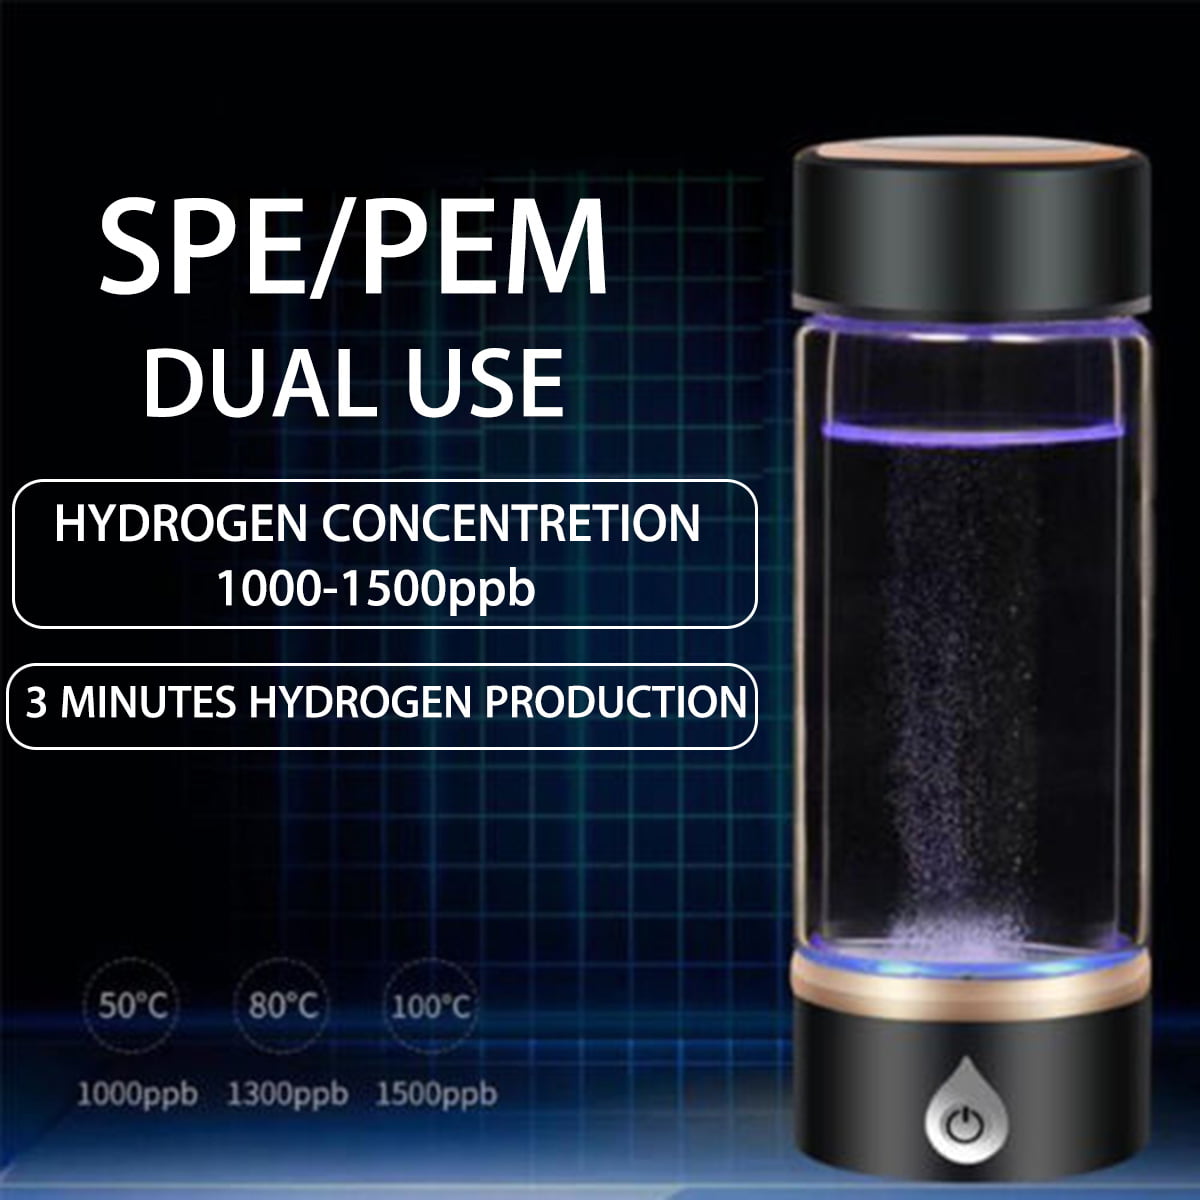 S SMAUTOP Hydrogen Water Generator For Home Use 2 Liters Portable Water Ion Generator Hydrogen-Rich Water Bottle Health Care Cup with Thermostat Digital Touch Control Led Display 